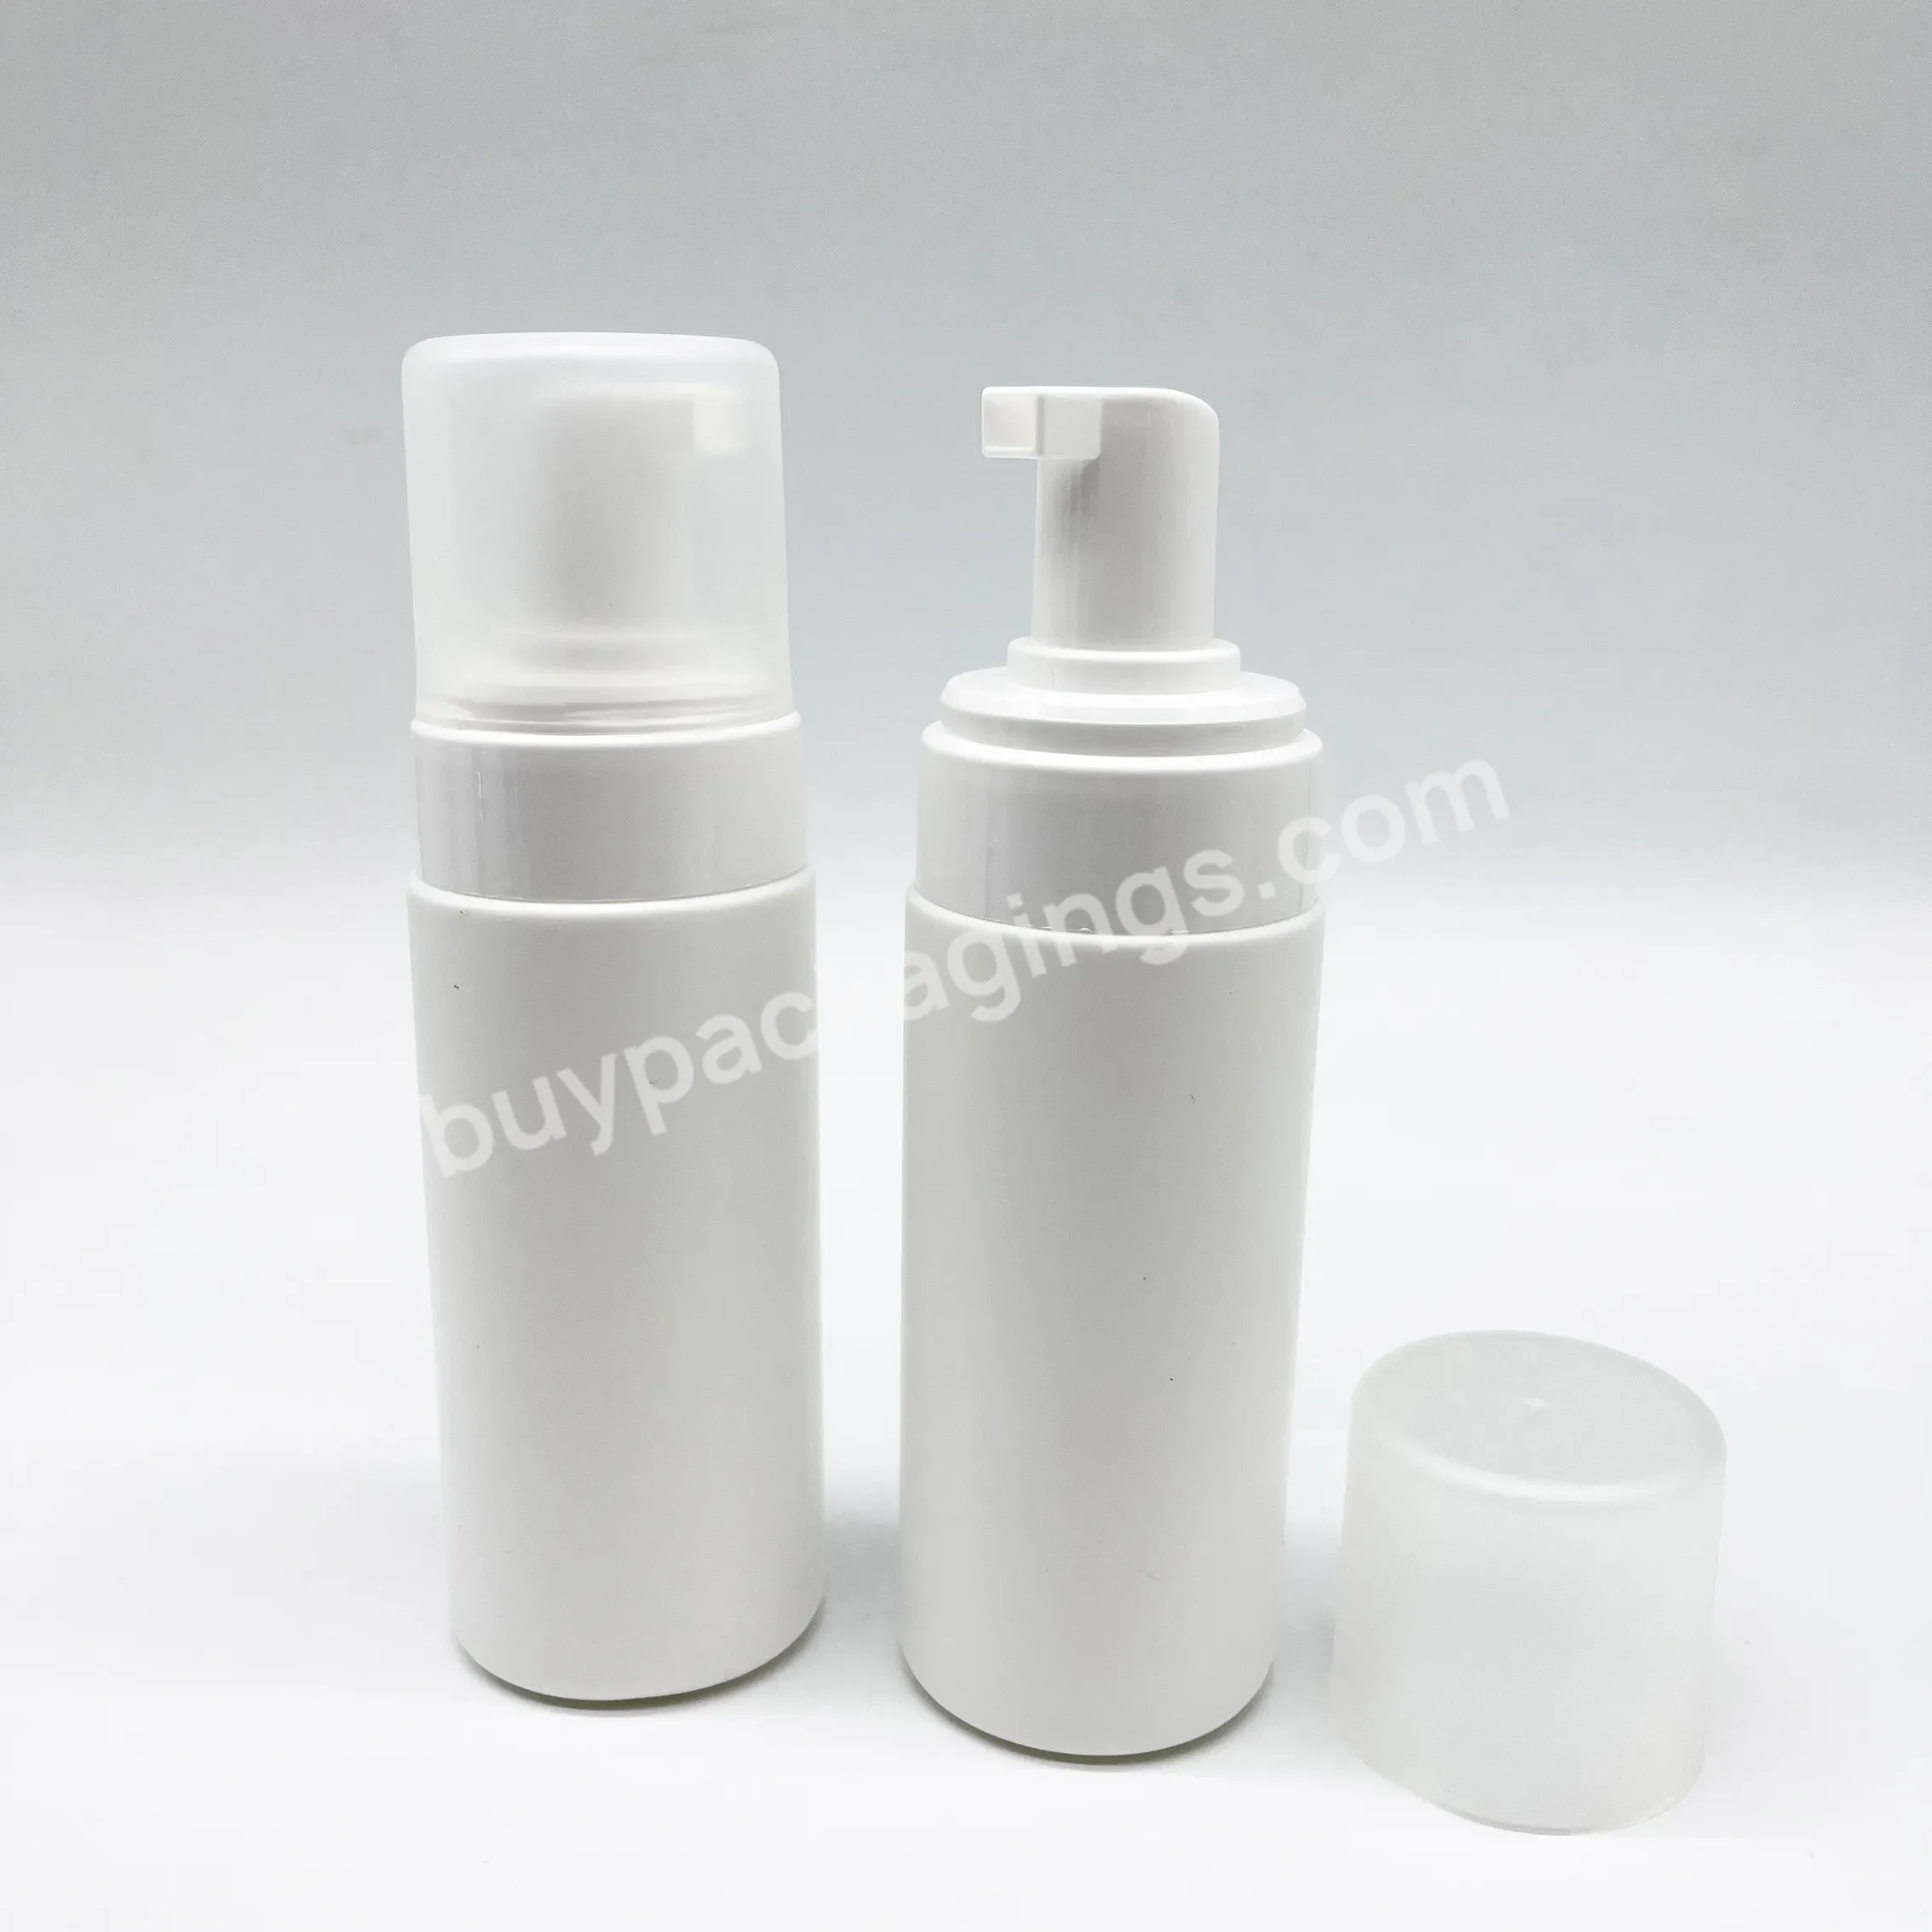 White Frost Pe Foam Soap Bottle With White Foam Pump And Clear Frost Cover Lid 4oz - Buy 120ml Plastic Foam Bottles,Plastic Foam Pump Bottle With Uv Gold Foam Pump,Foam Cleanser Bottle 120ml.